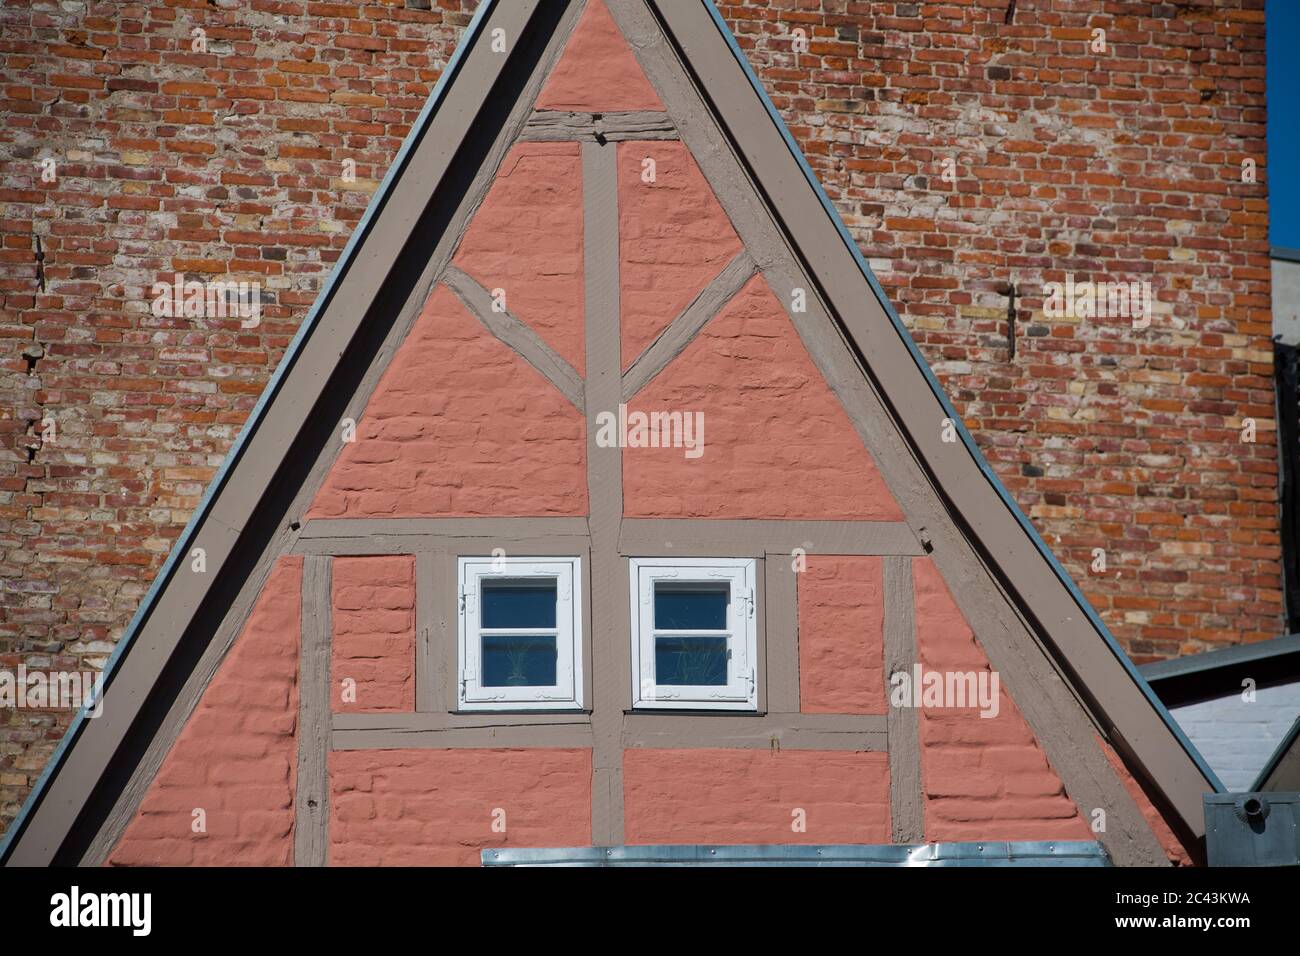 15 June 2020, Mecklenburg-Western Pomerania, Stralsund: Half-timbered houses in the monastery courtyard of the former Franciscan monastery St. Johannis (Johanniskloster) in the old town of Stralsund. The Hanseatic city of Stralsund, first mentioned in 1234, is one of the tourist magnets in Mecklenburg-Vorpommern because of the more than 500 listed buildings, most of which have been extensively restored in recent years with the trustee redevelopment company Stadterneuerungsgesellschaft Stralsund mbH (SES). In June 2002, the medieval old town centre of Stralsund was included in the UNESCO list o Stock Photo